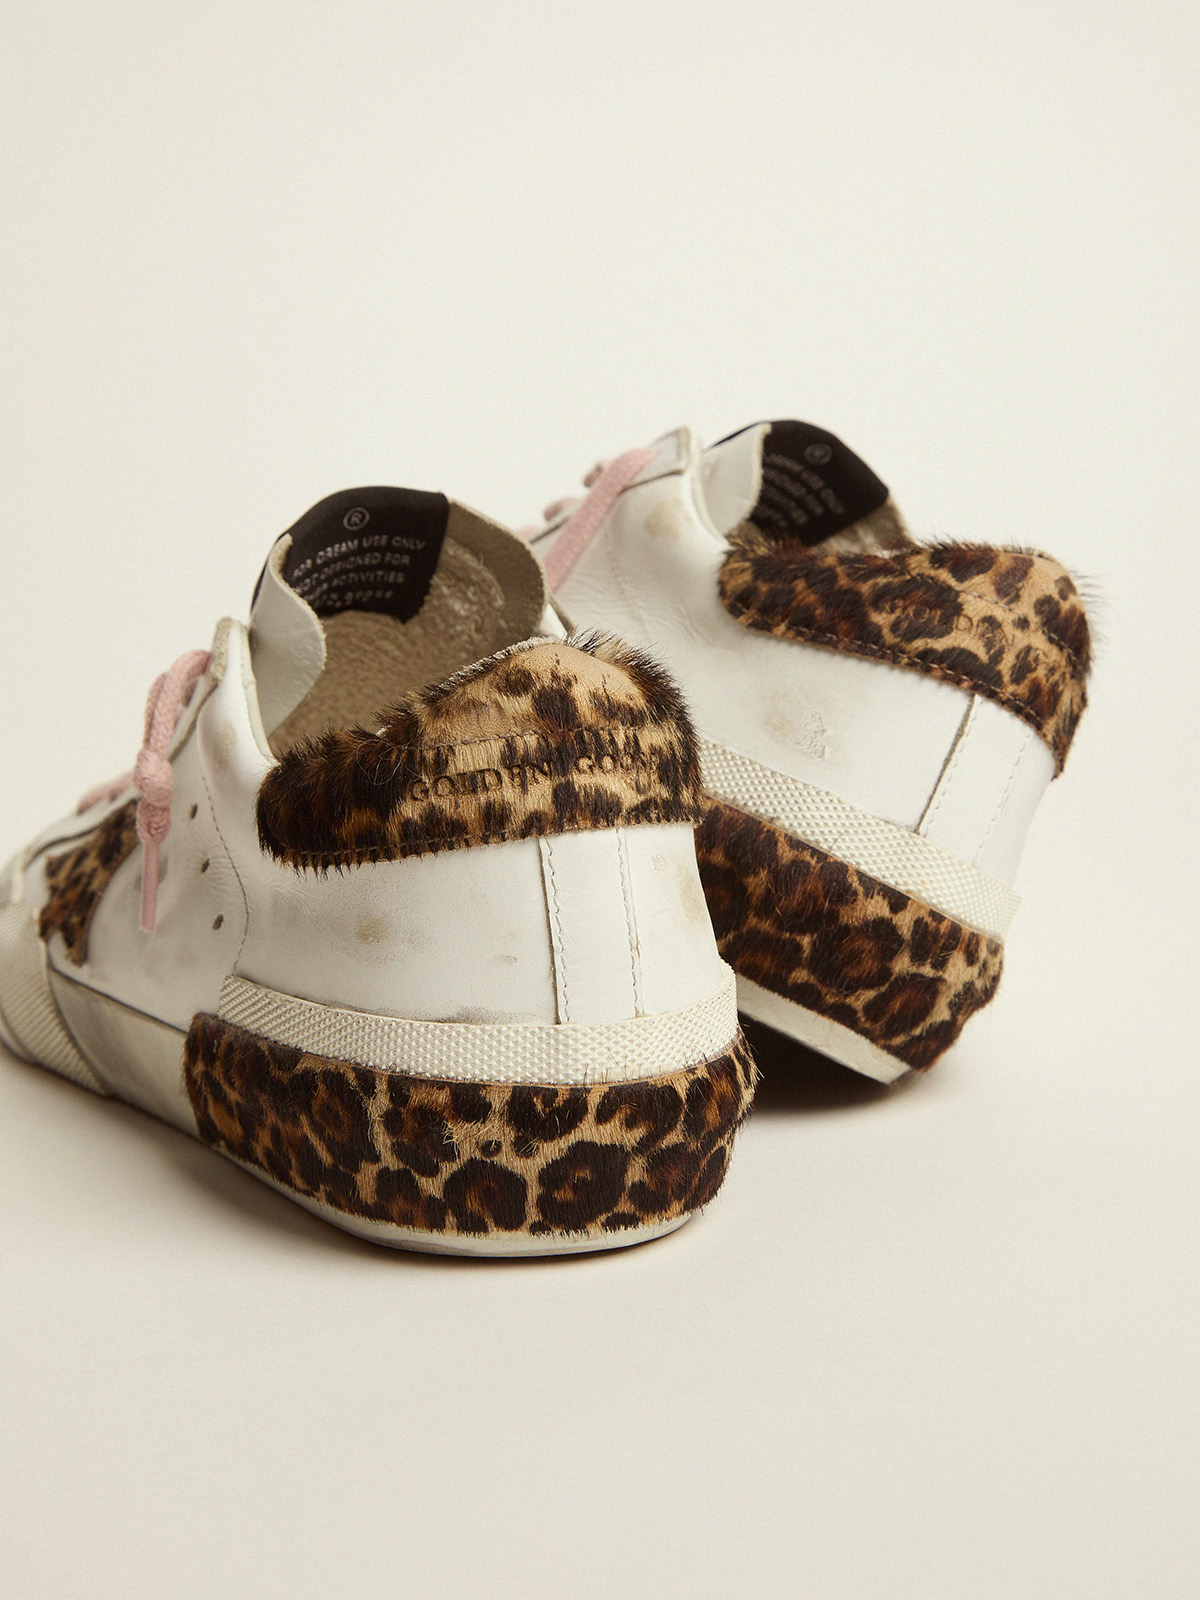 Super-Star sneakers in white leather with details and multi-foxing in  leopard-print pony skin | Golden Goose